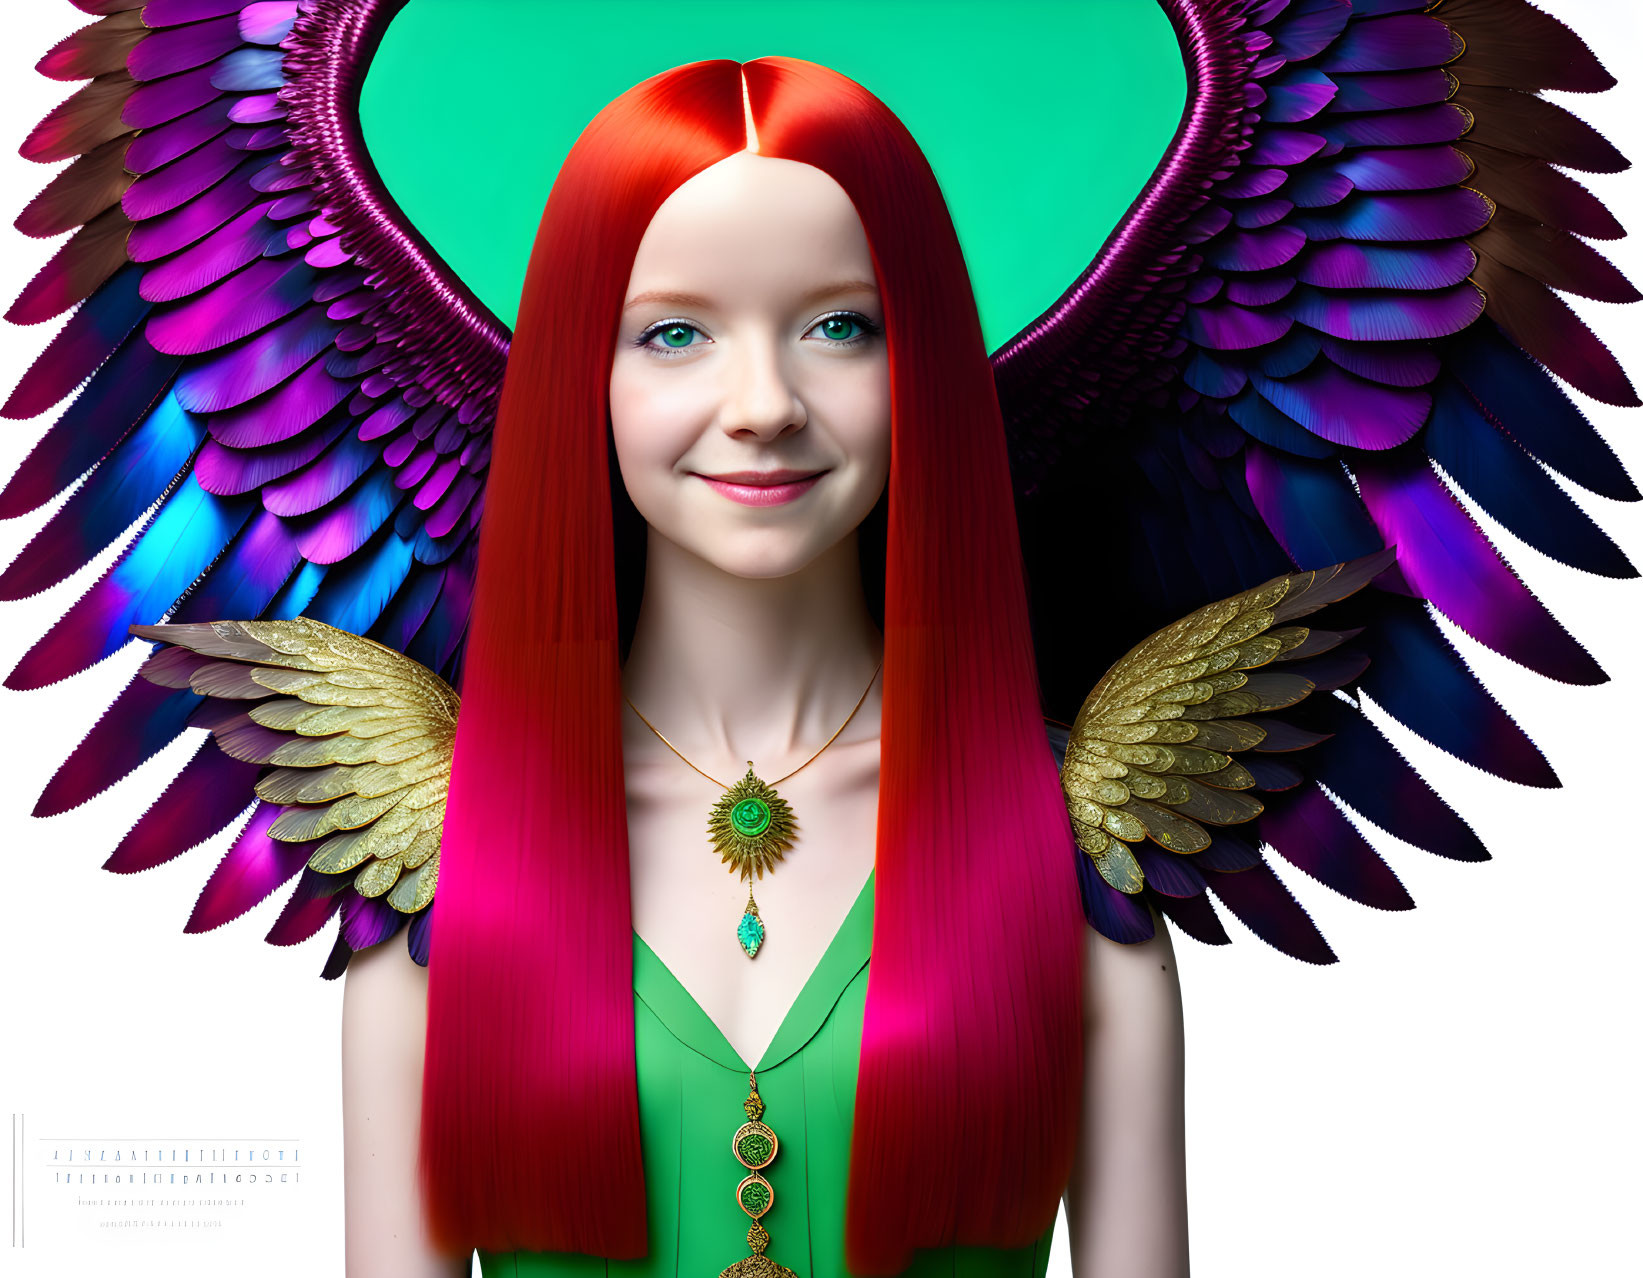 Colorful digital portrait: young woman with red hair, green attire, multicolored wings, gold